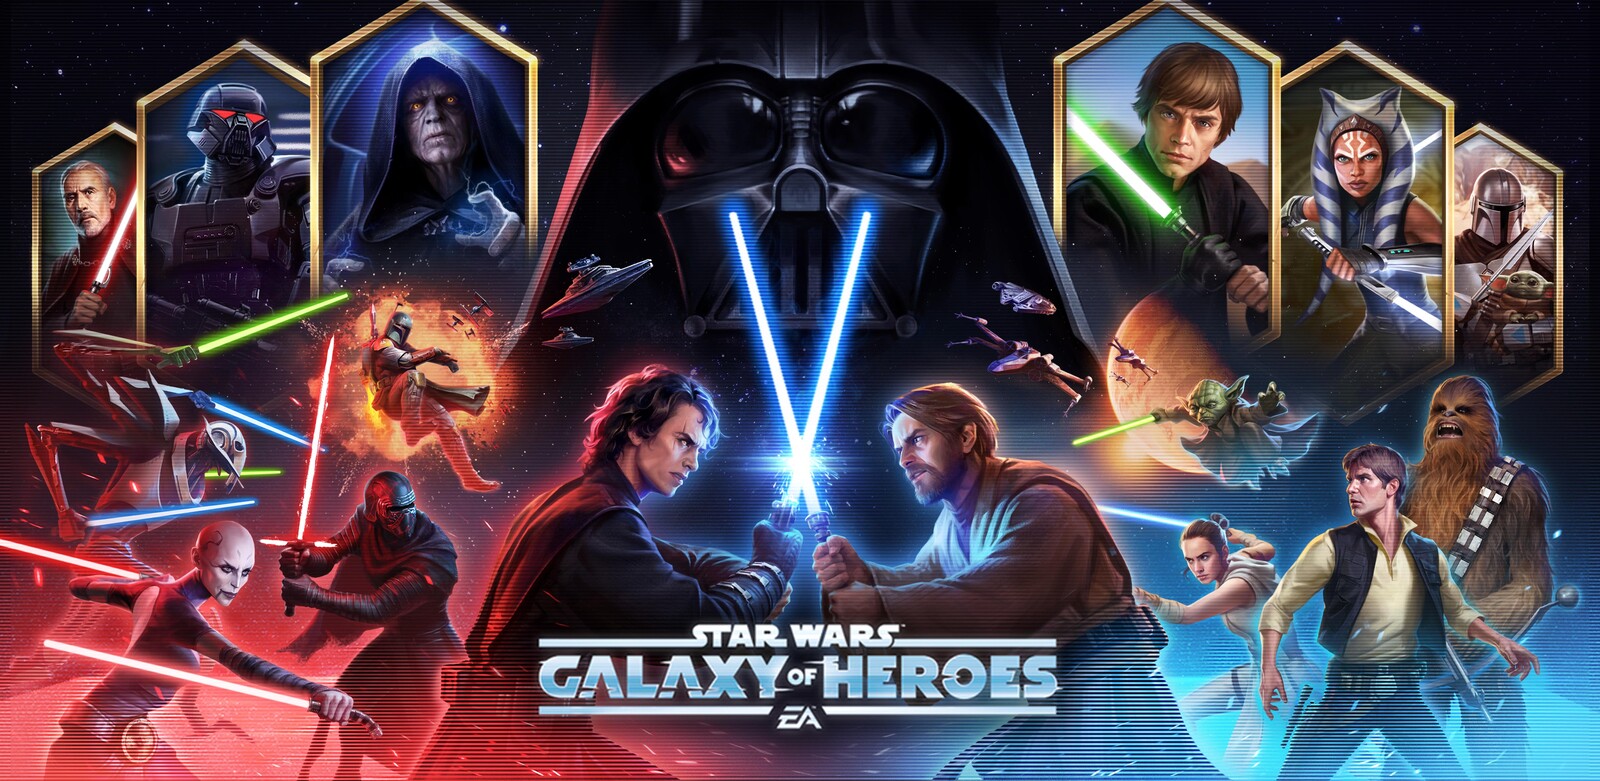 KeyArt for SWGOH game I Art Directed and managed. Credit to Atomhawk studios and their amazing artists.
